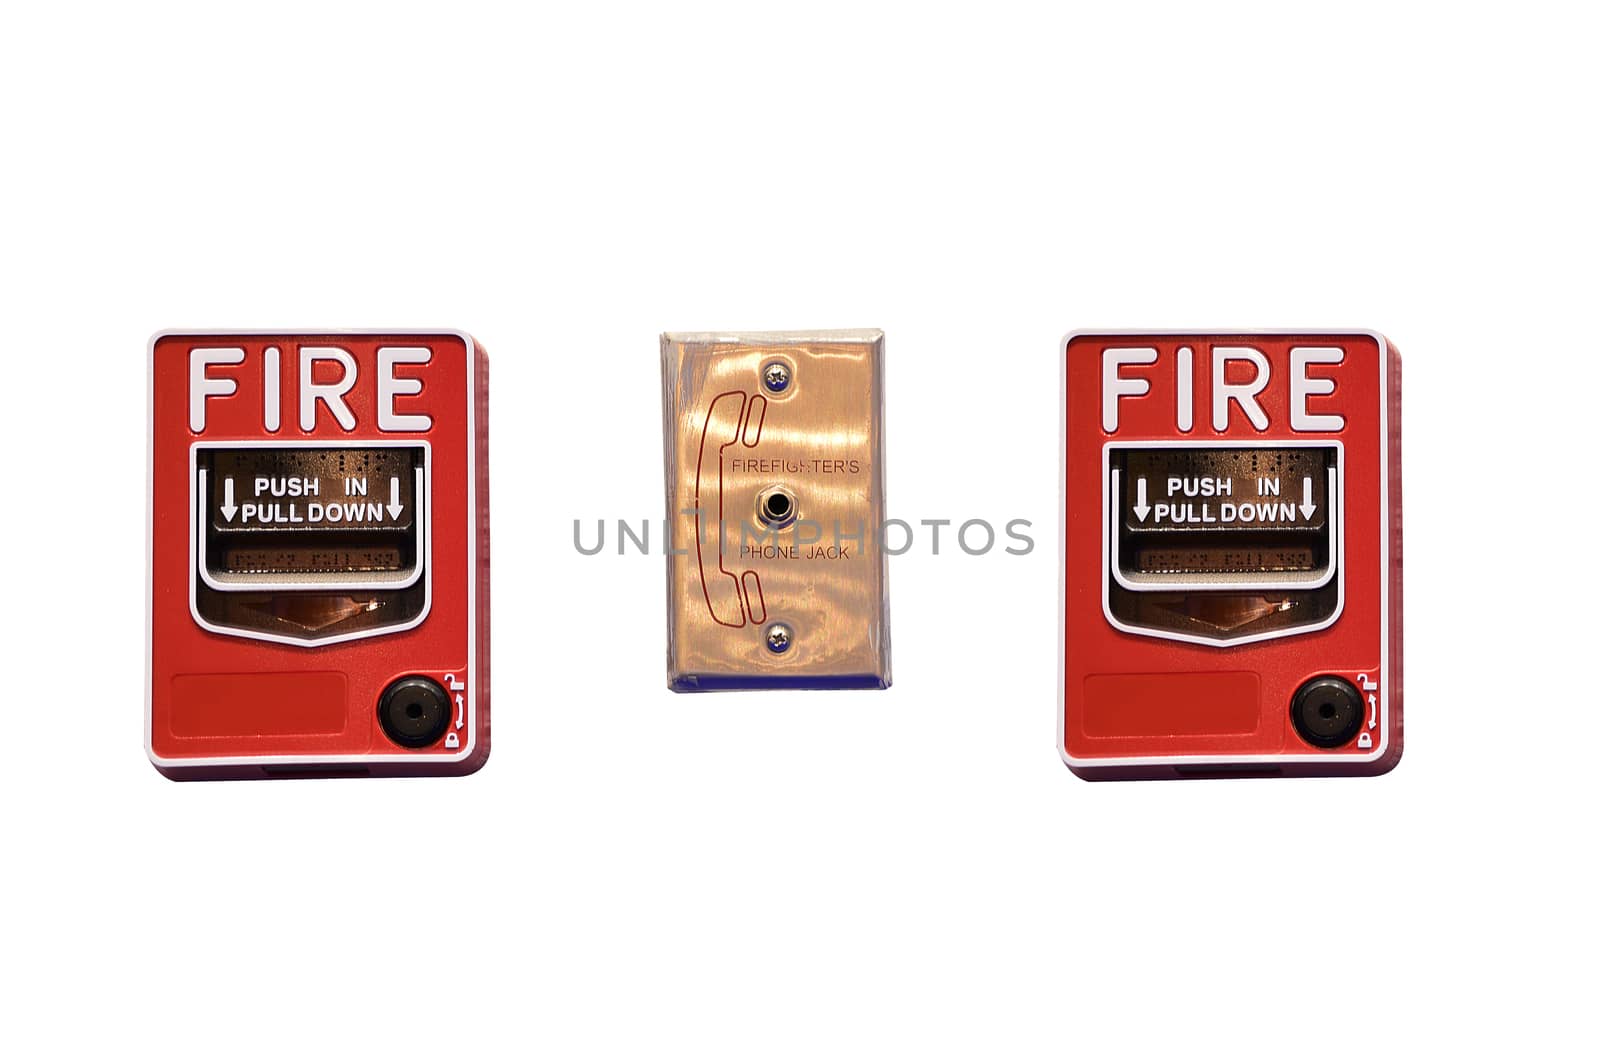 Fire alarm switch isolate on white background